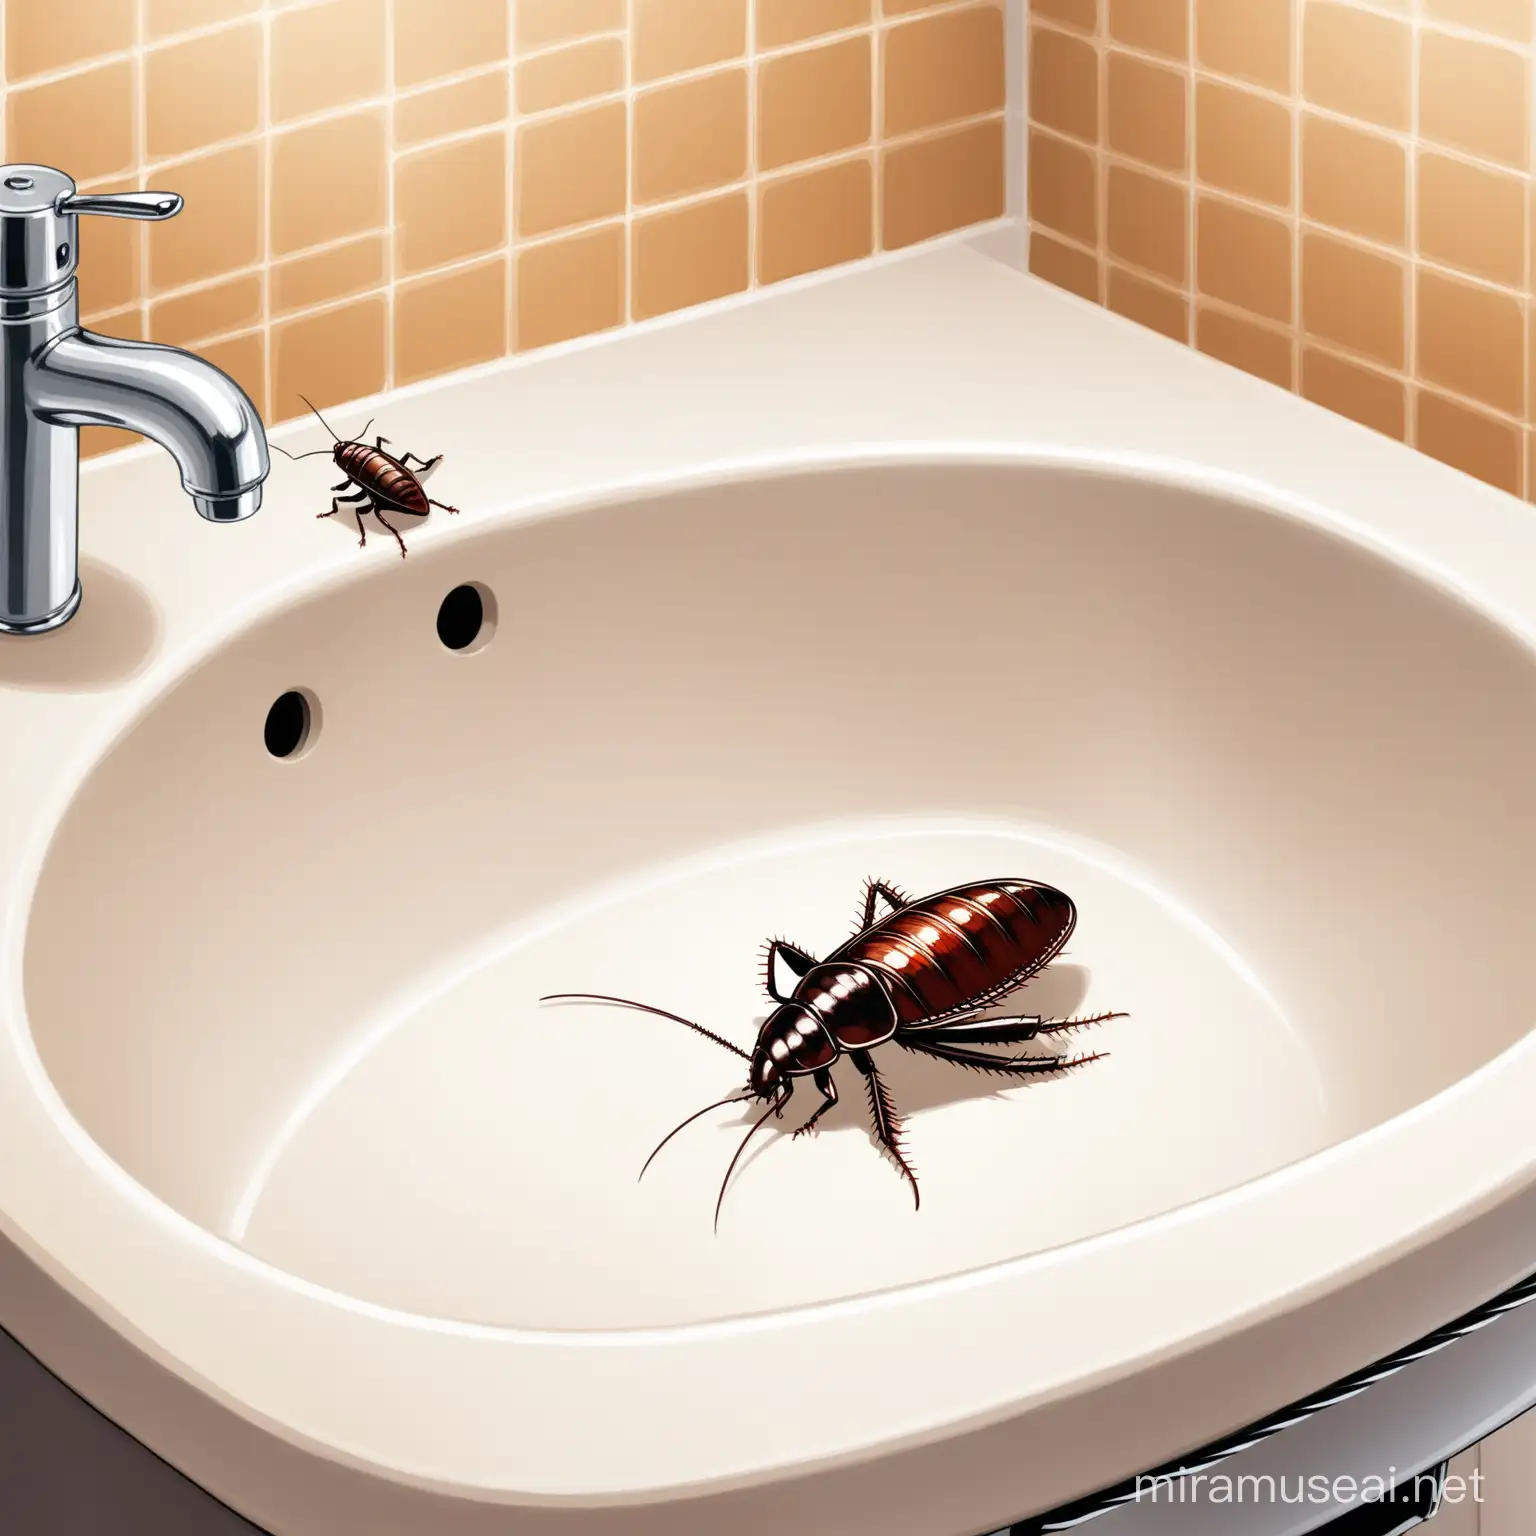 a woman is scared because she finds a cockroach under the sink in the bathroom.